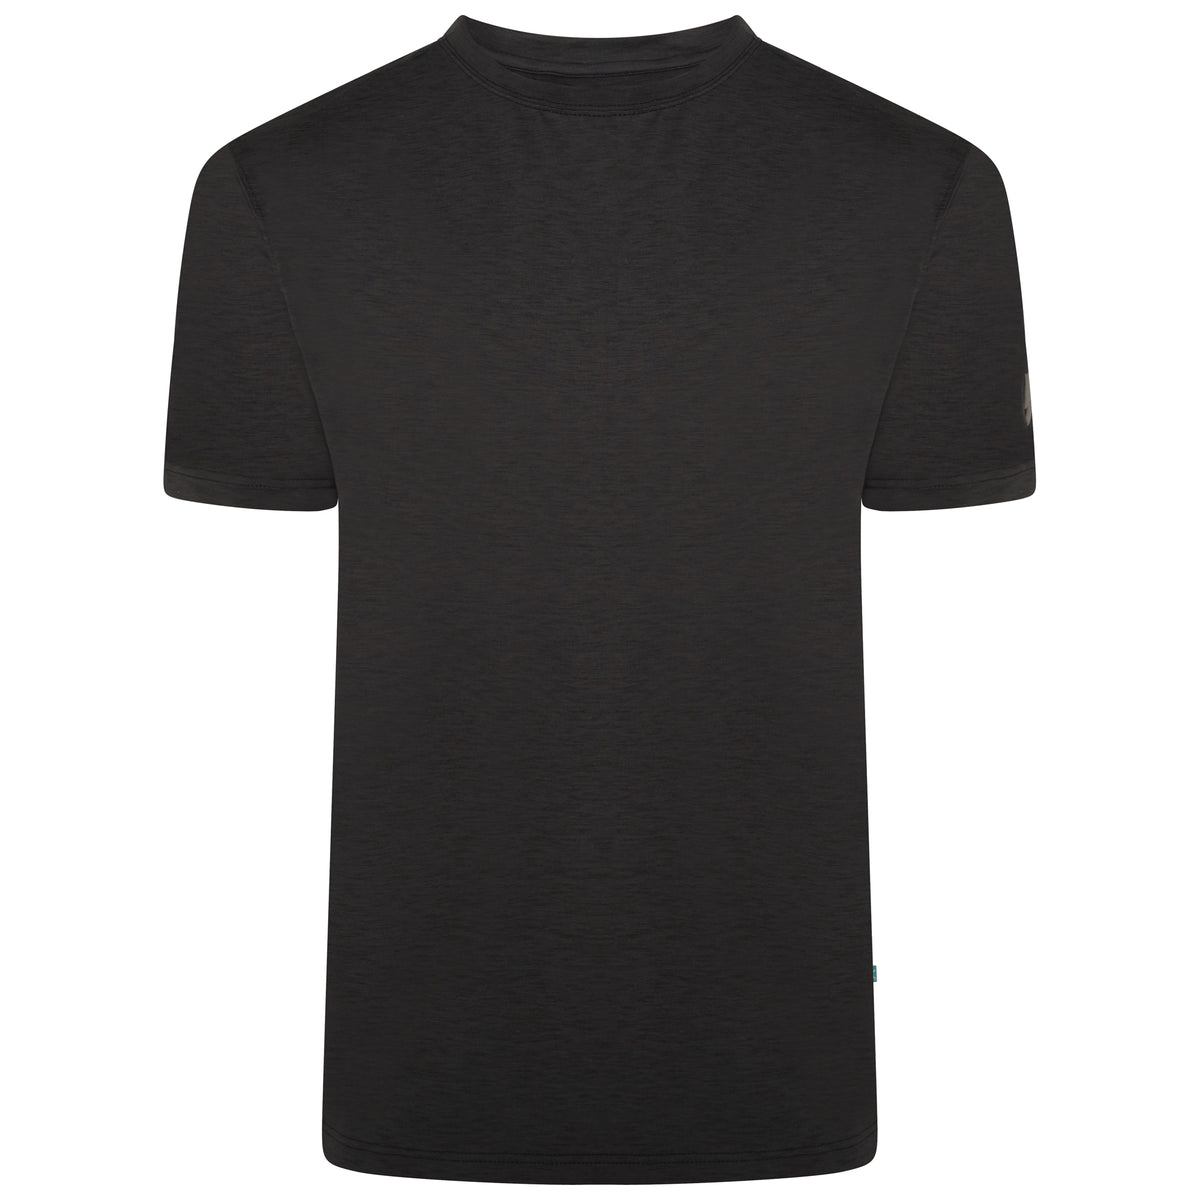 Tall Fit Active Performance Marl Tee